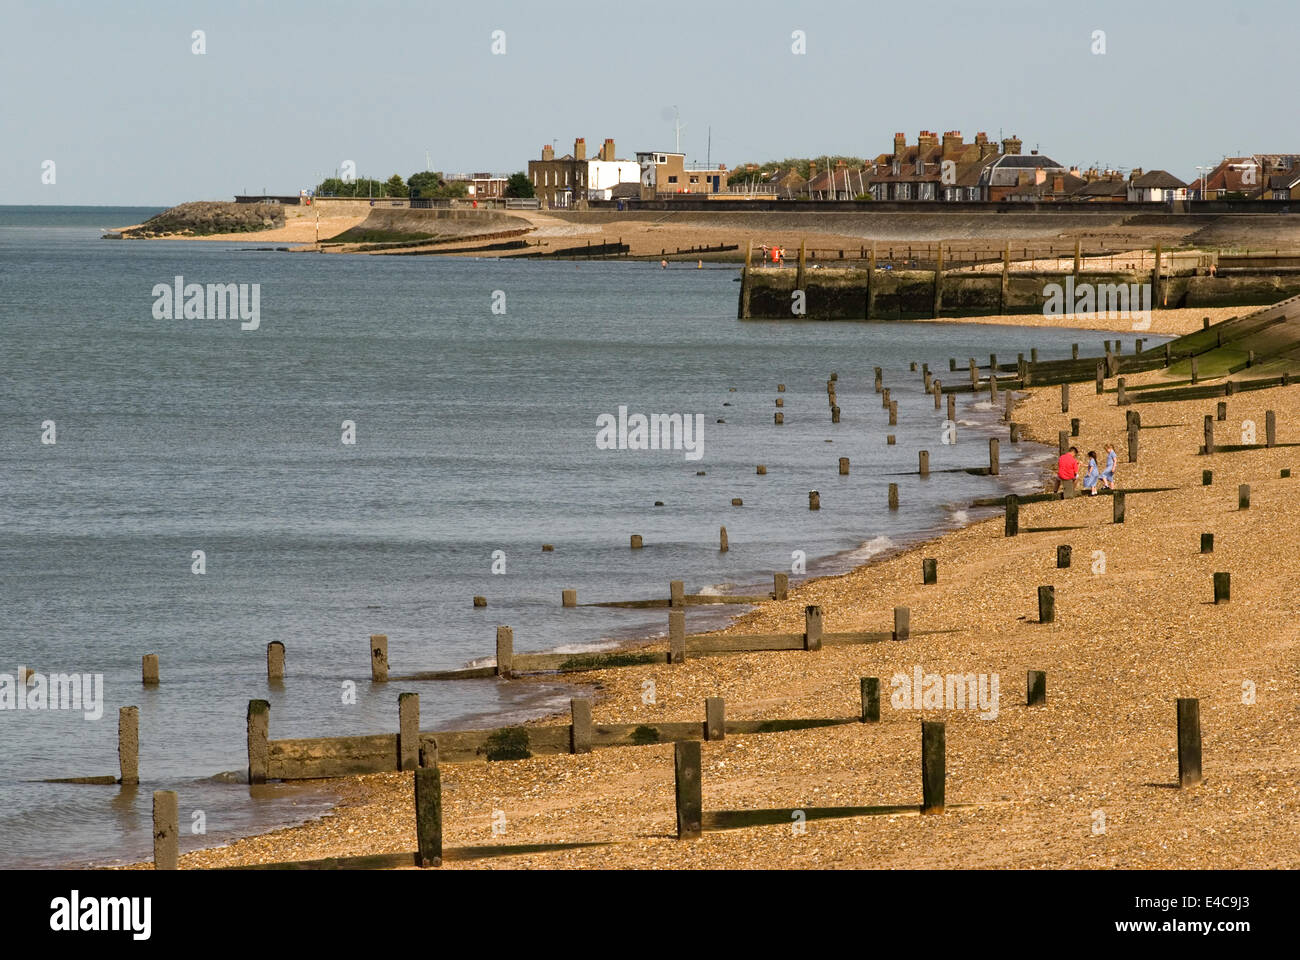 Sheerness sandy beach with very few people. Isle of Sheppey Kent UK. 2014 2010s HOMER SYKES Stock Photo